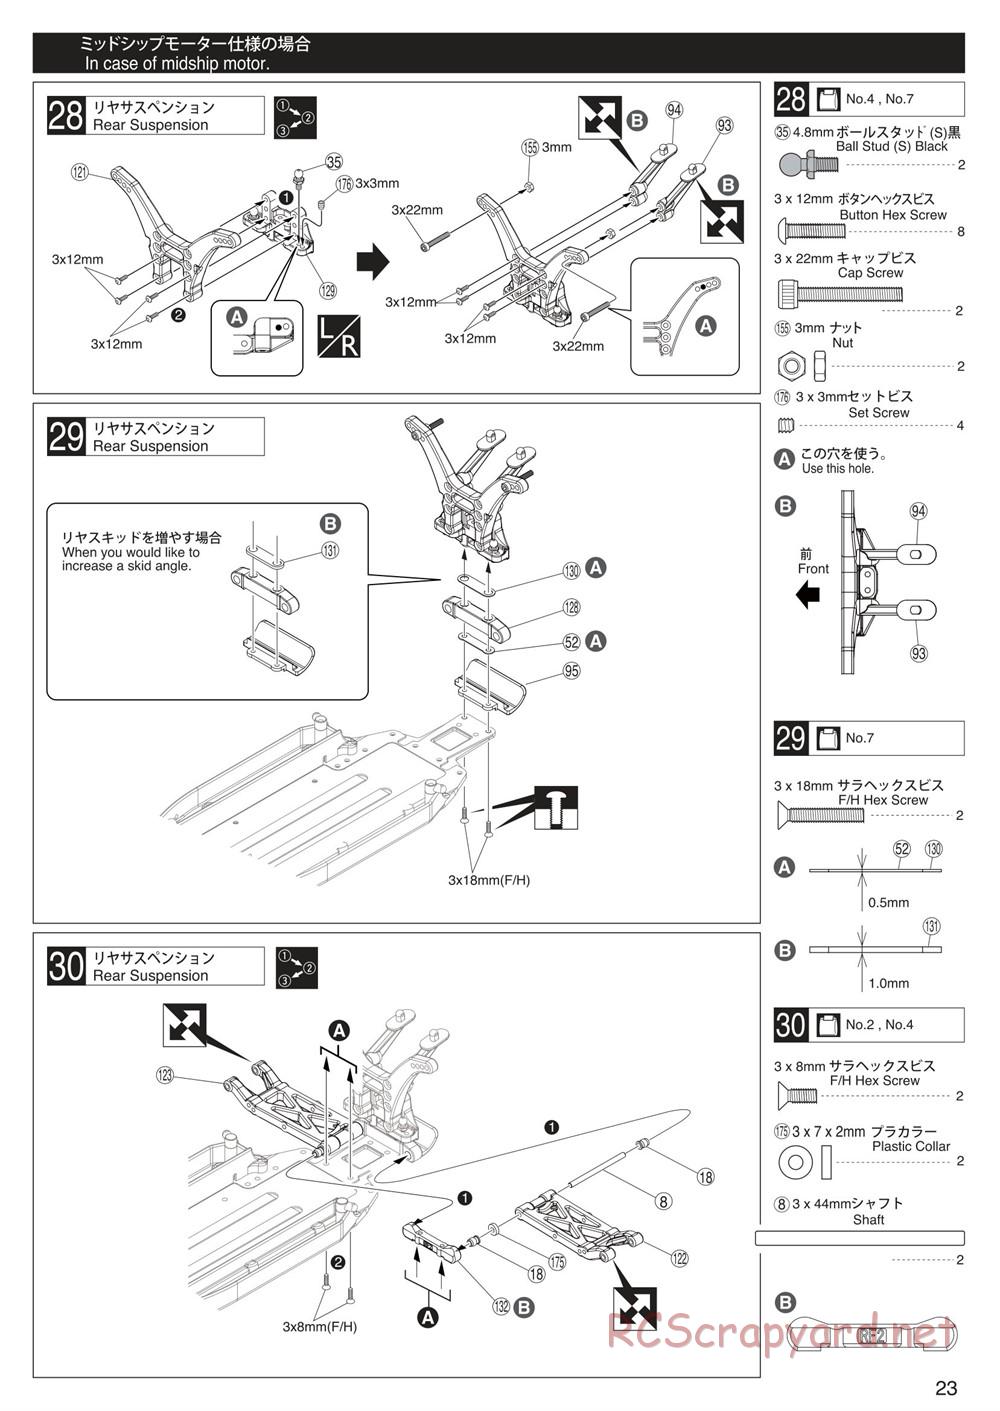 Kyosho - Ultima RB6 - Manual - Page 23